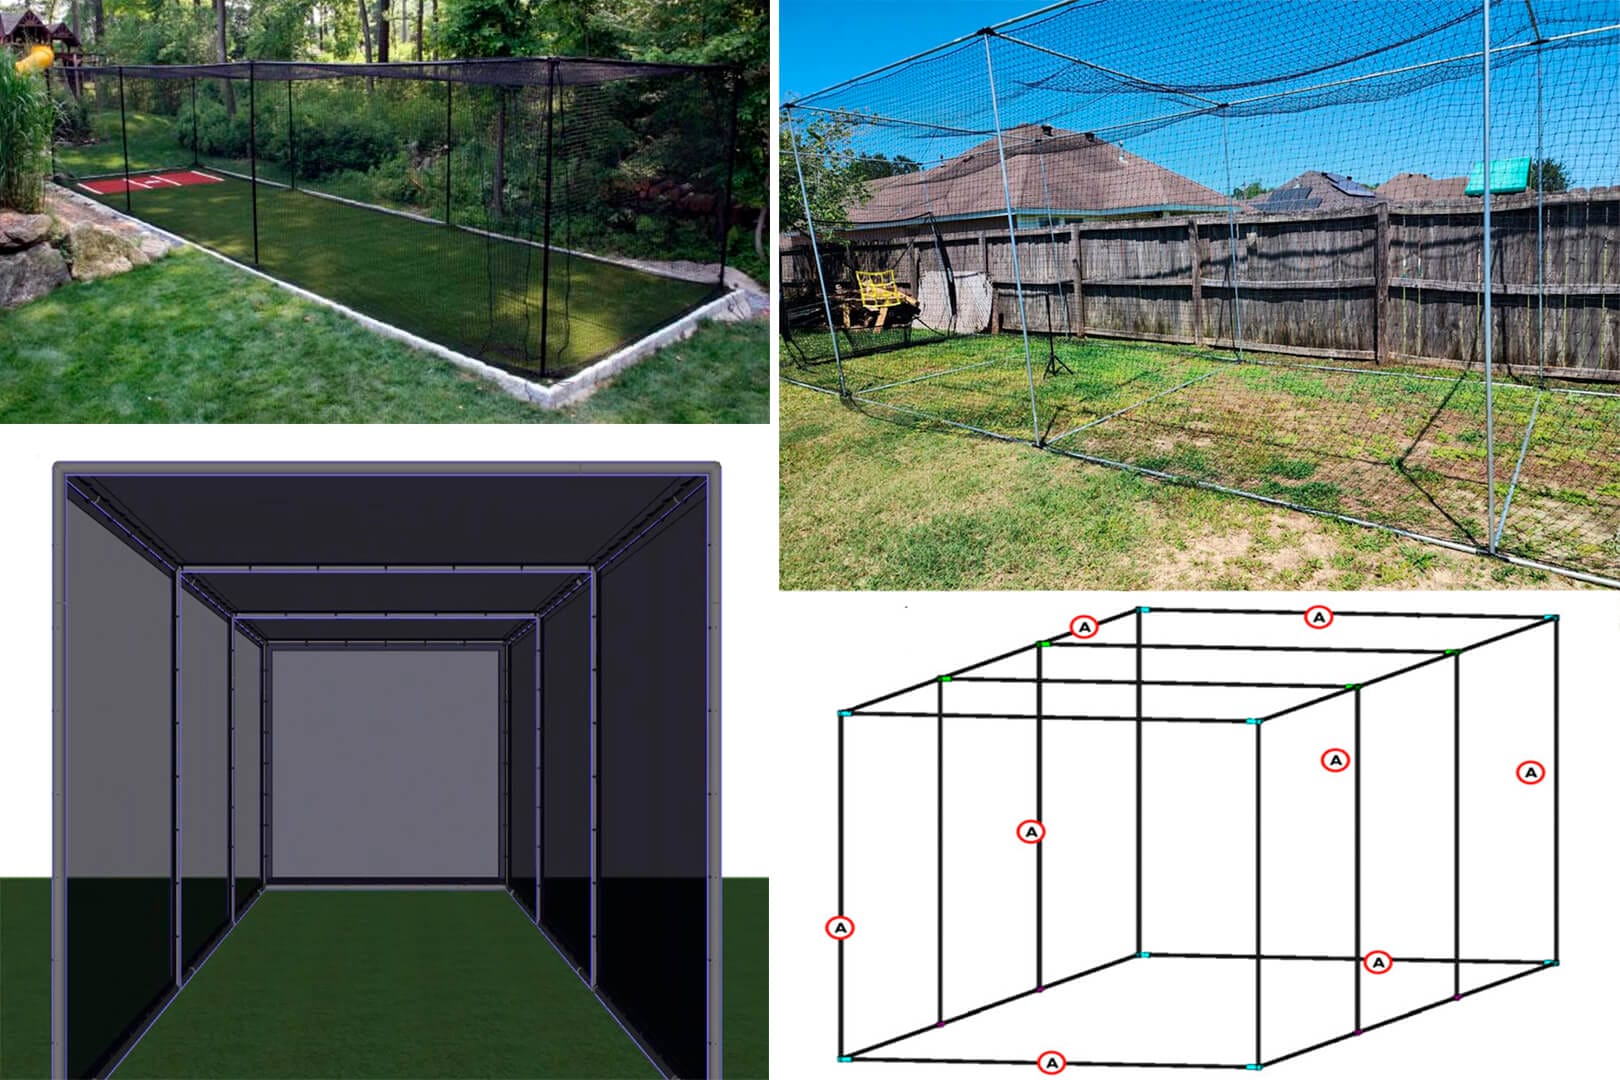 DIY Batting Cage: a Free Plan to Build Your Own